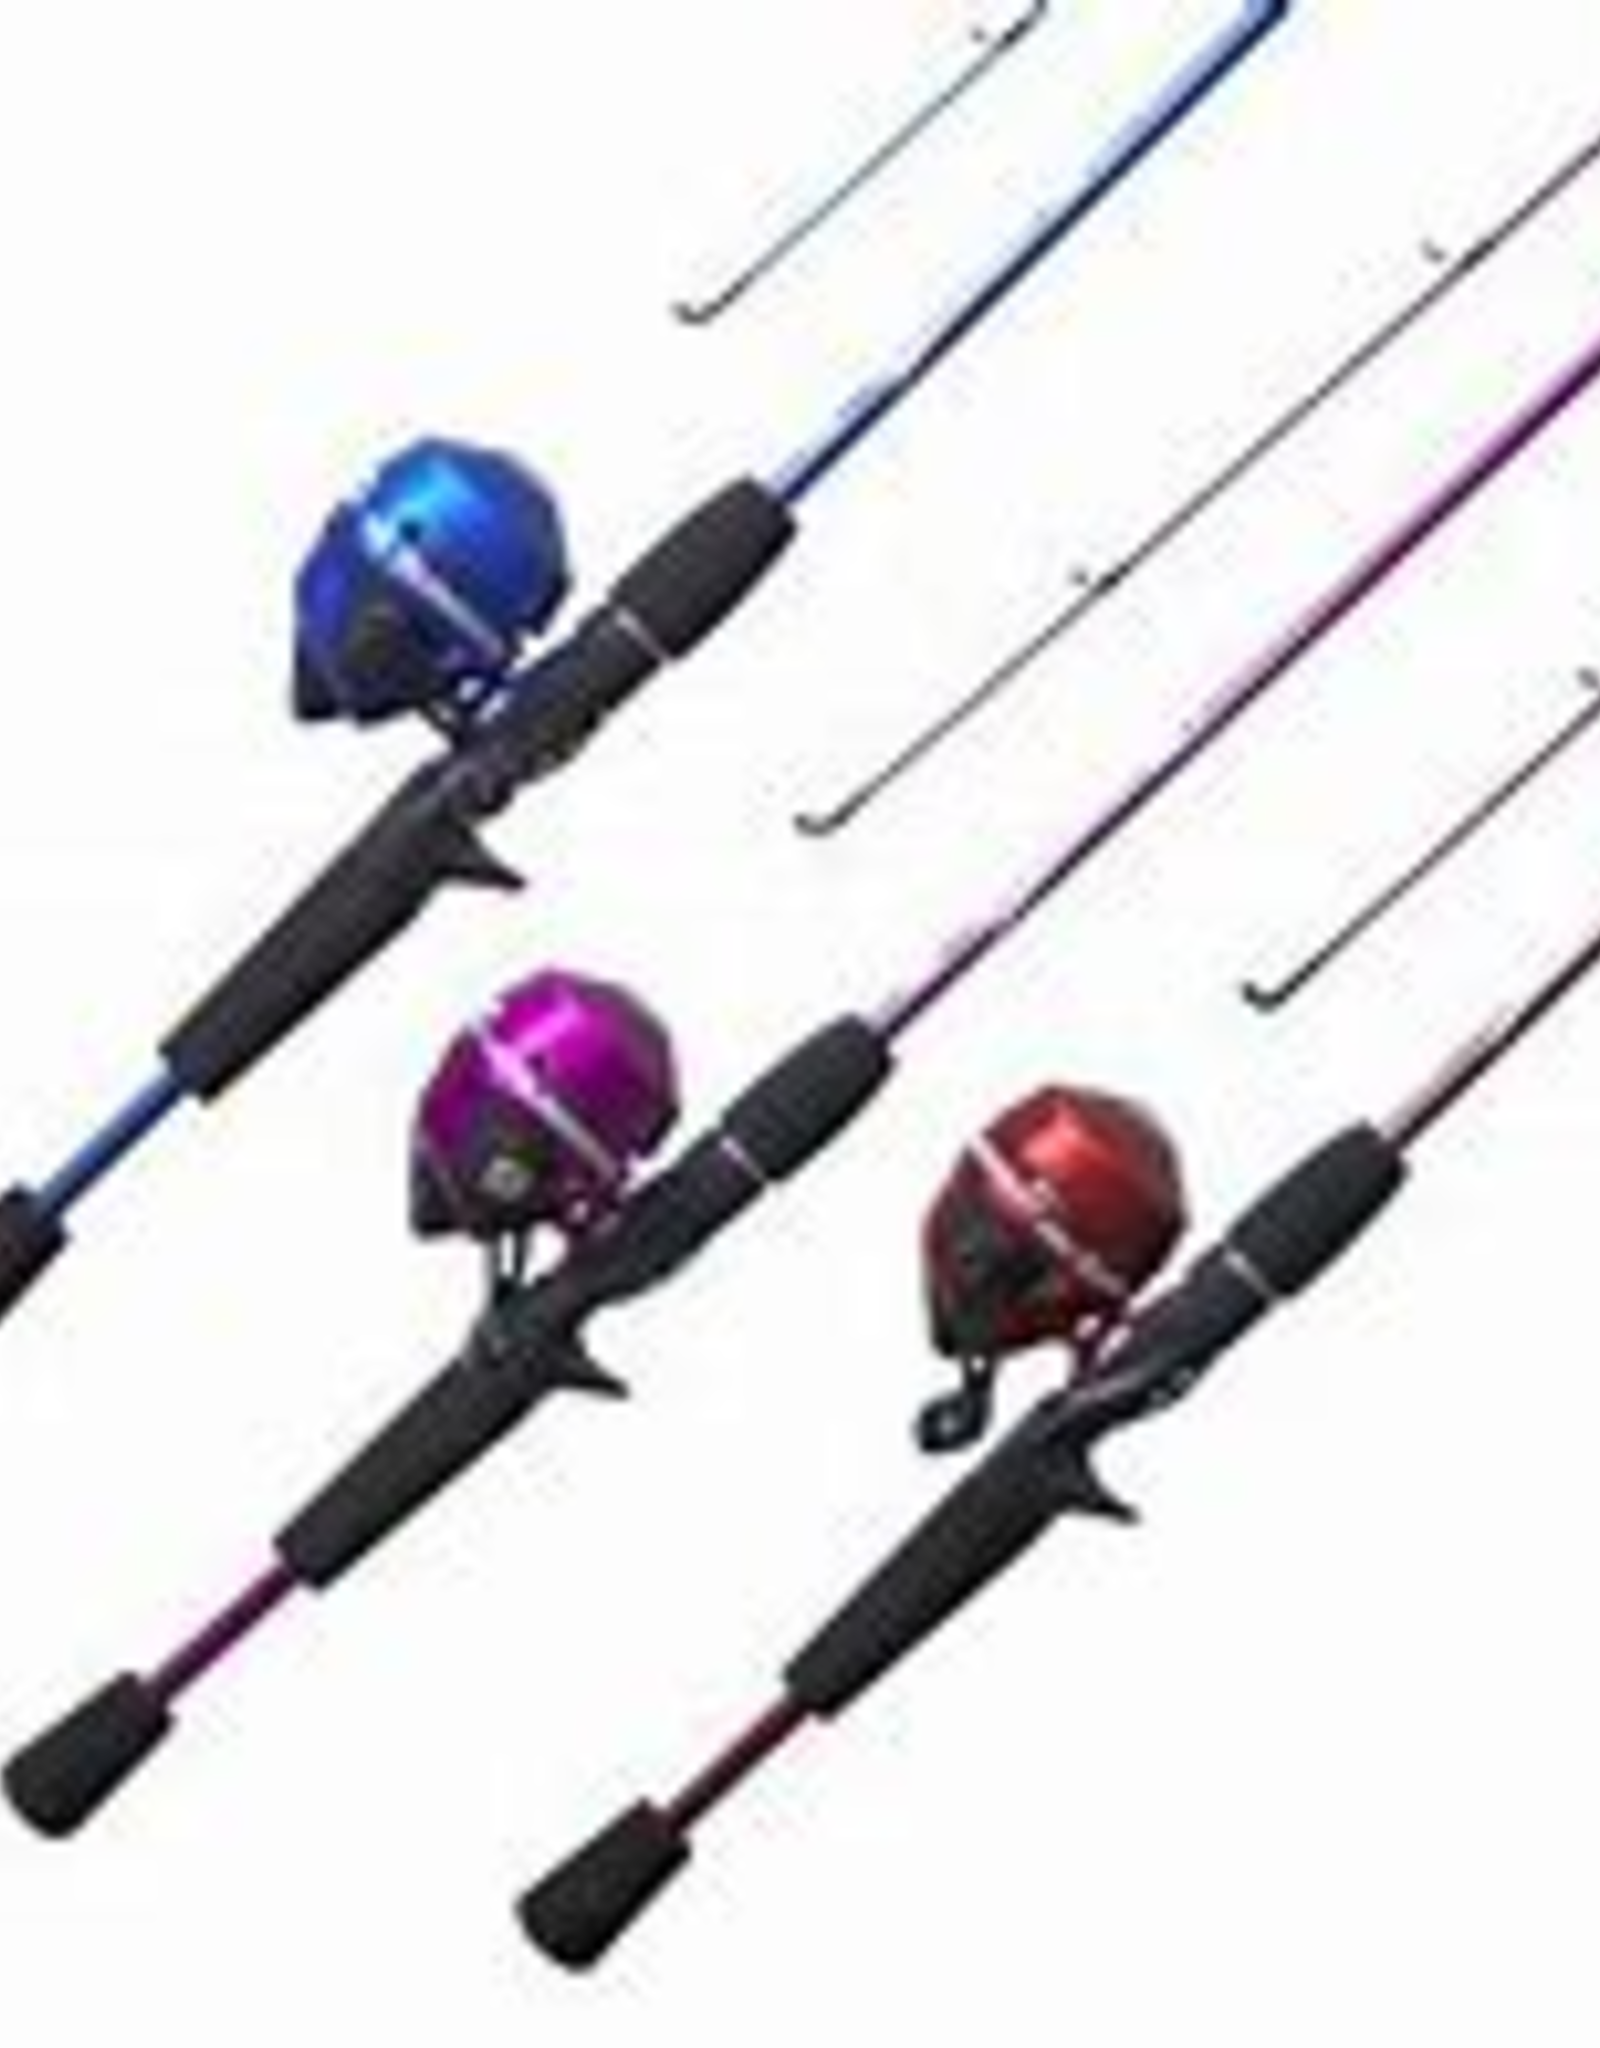 Zebco Slingshot Rod/Reel Combo Available in Purple, Blue, or Red